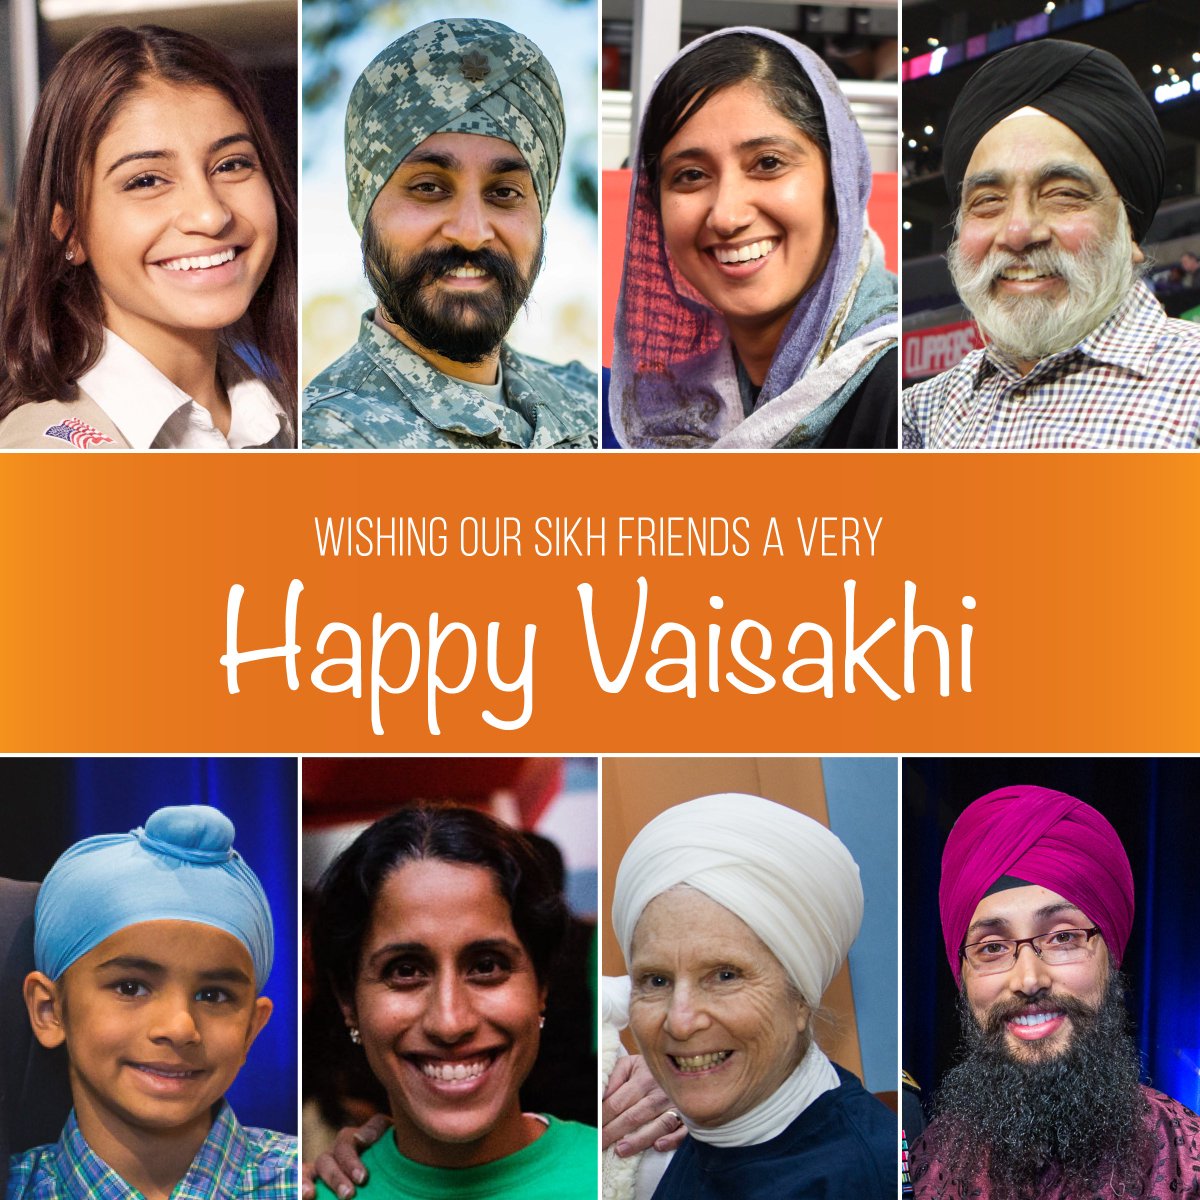 RT @SenJeffMerkley: Wishing our Sikh American neighbors, colleagues and friends a happy #Vaisakhi! https://t.co/52qr38B1iU